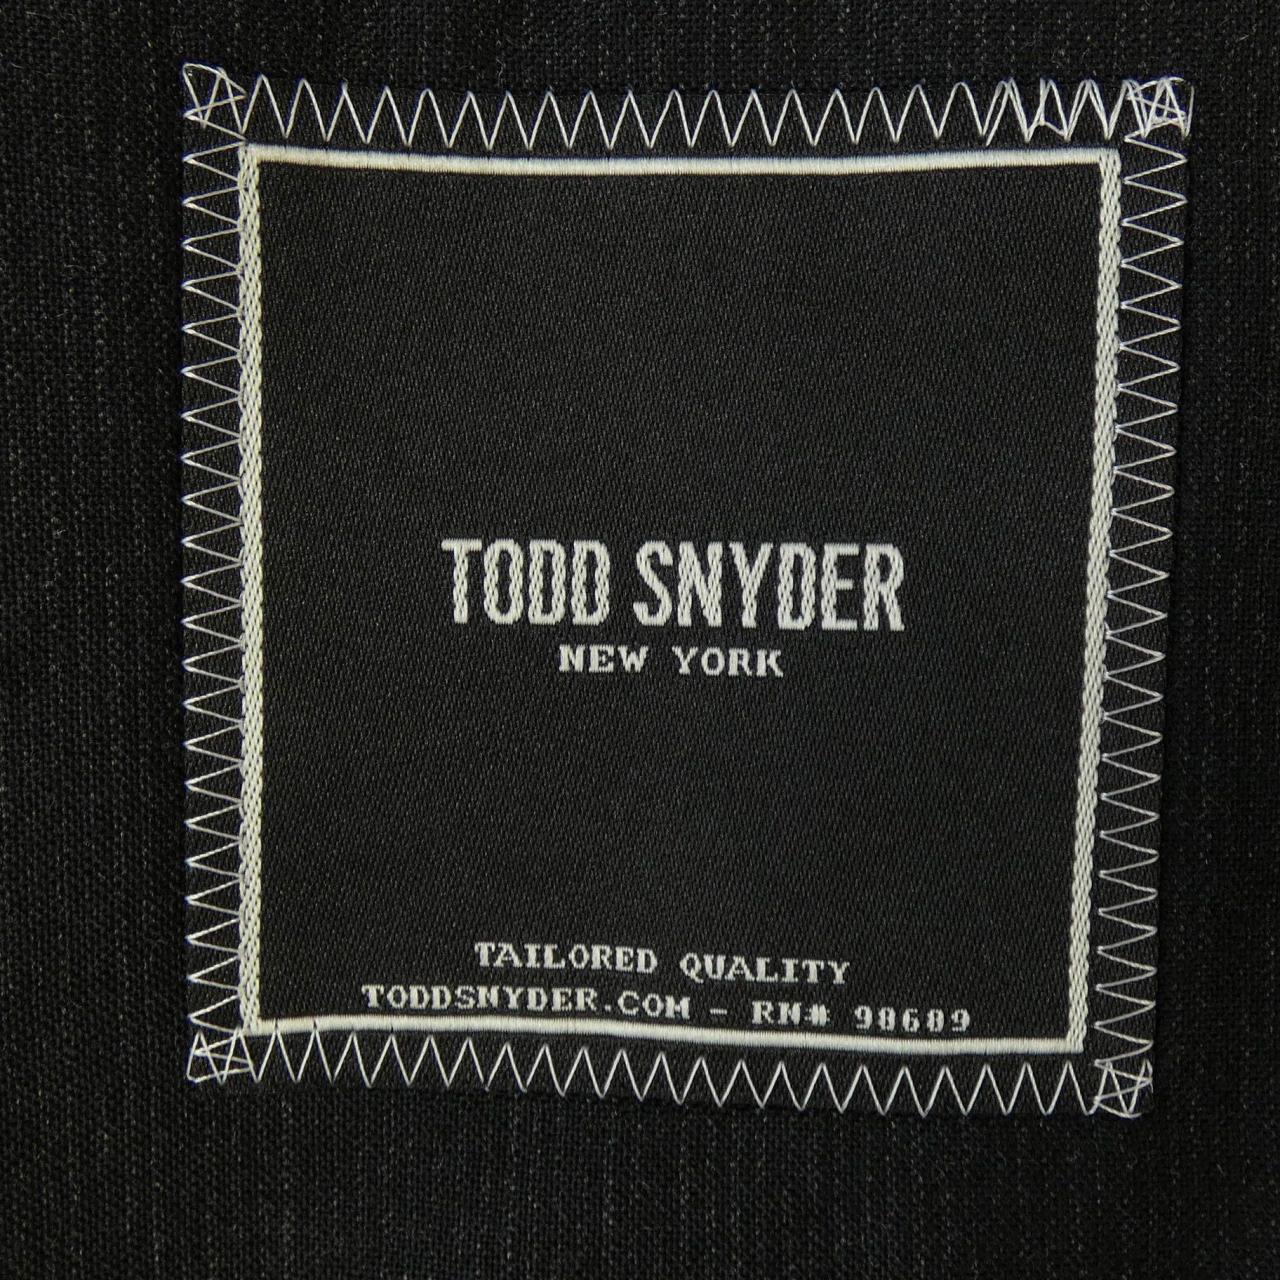 TODOSNYDER suit